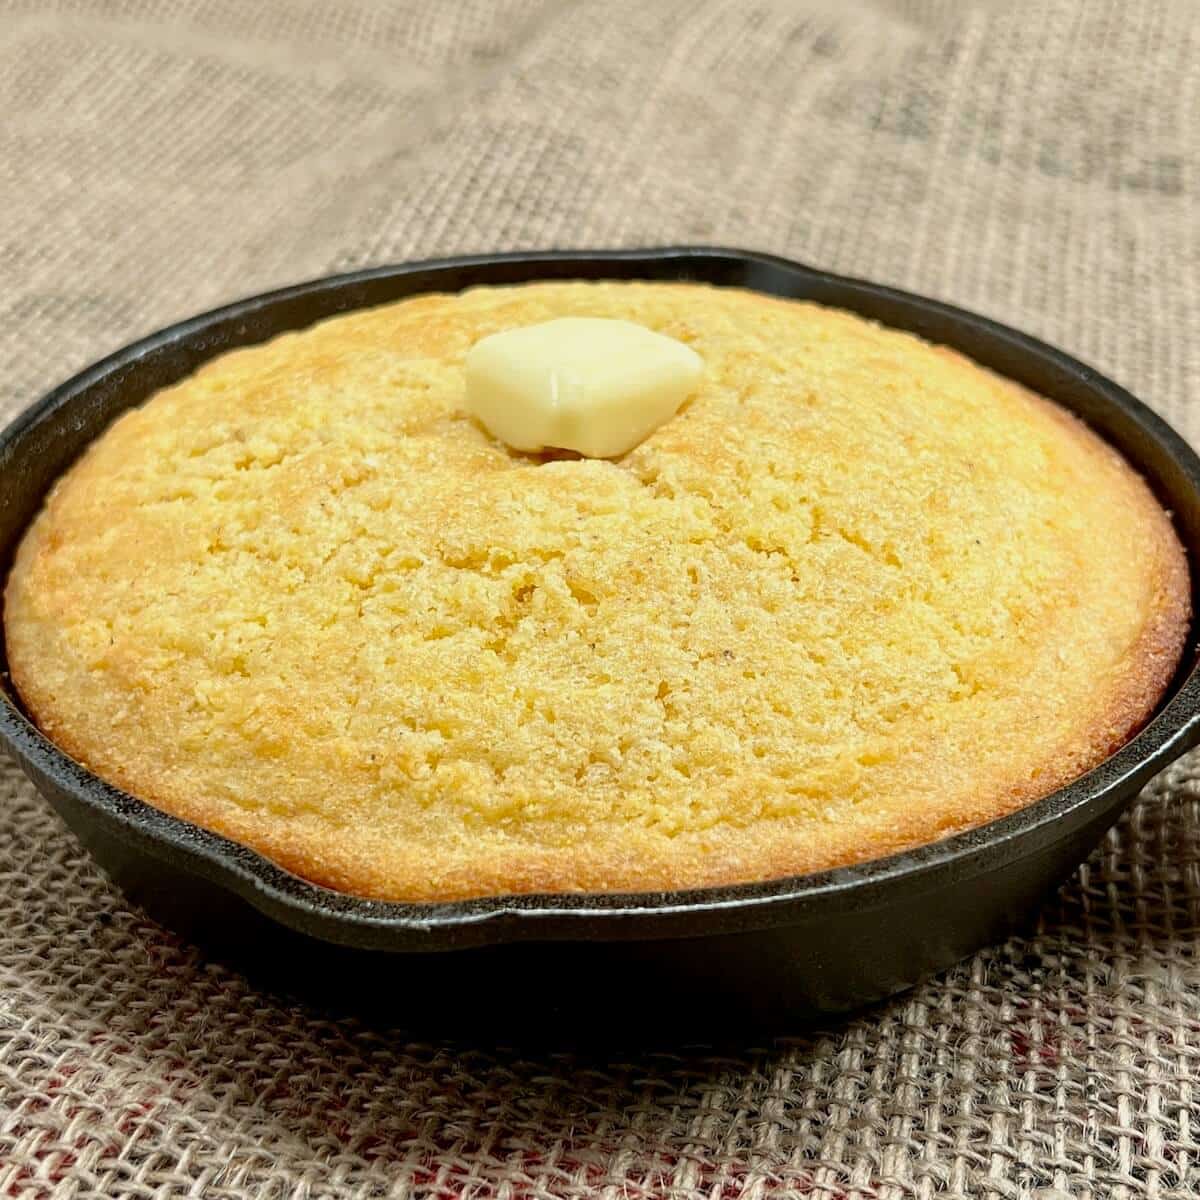 Whole cornbread topped with pat of butter in a cast iron skillet on a piece of burlap.